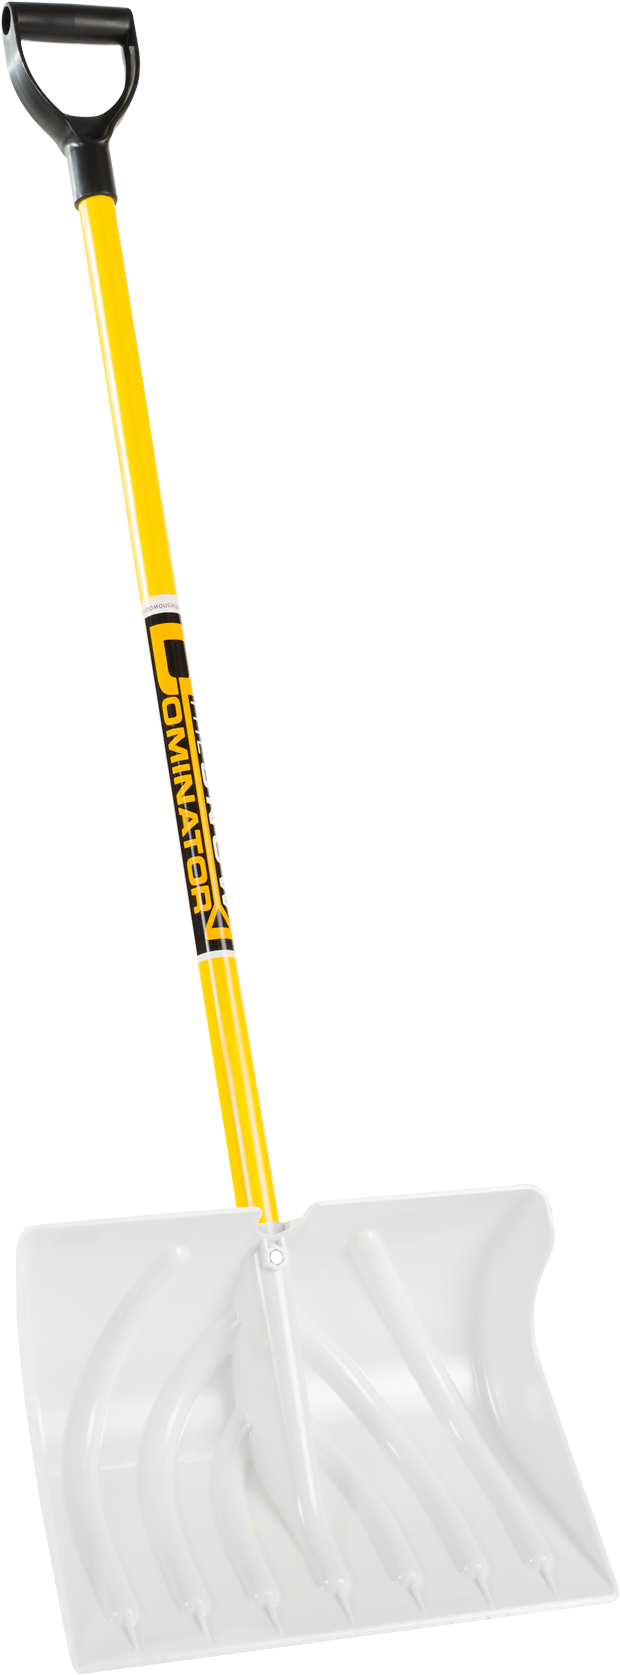 A Yellow And Black Pencil